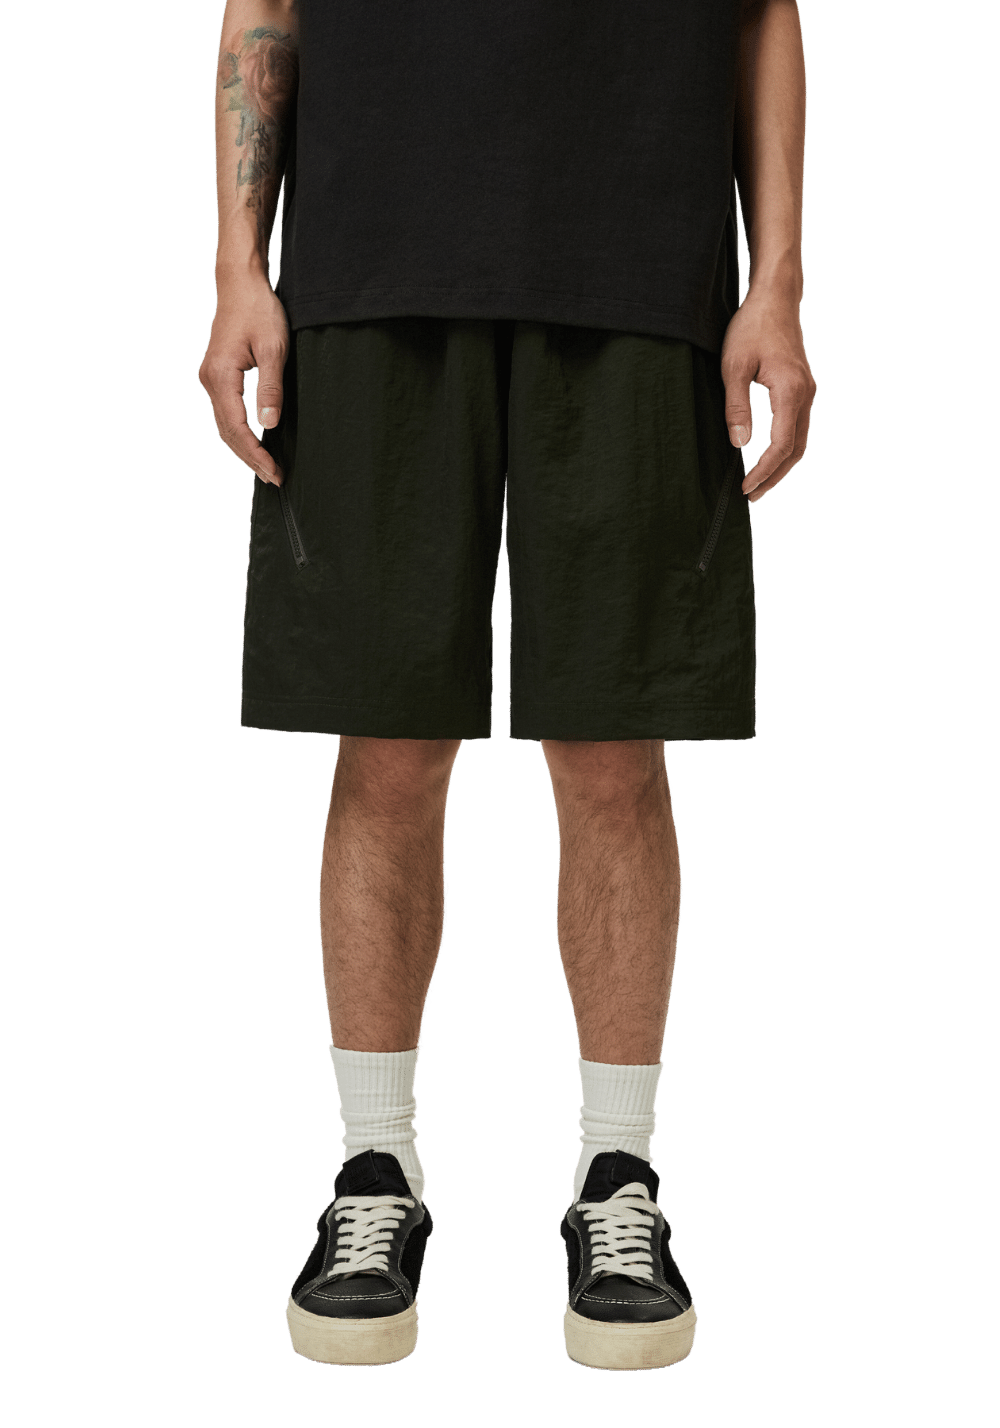 Curved Zip Track Shorts - PSYLOS 1, Curved Zip Track Shorts, Shorts, Boneless, PSYLOS 1